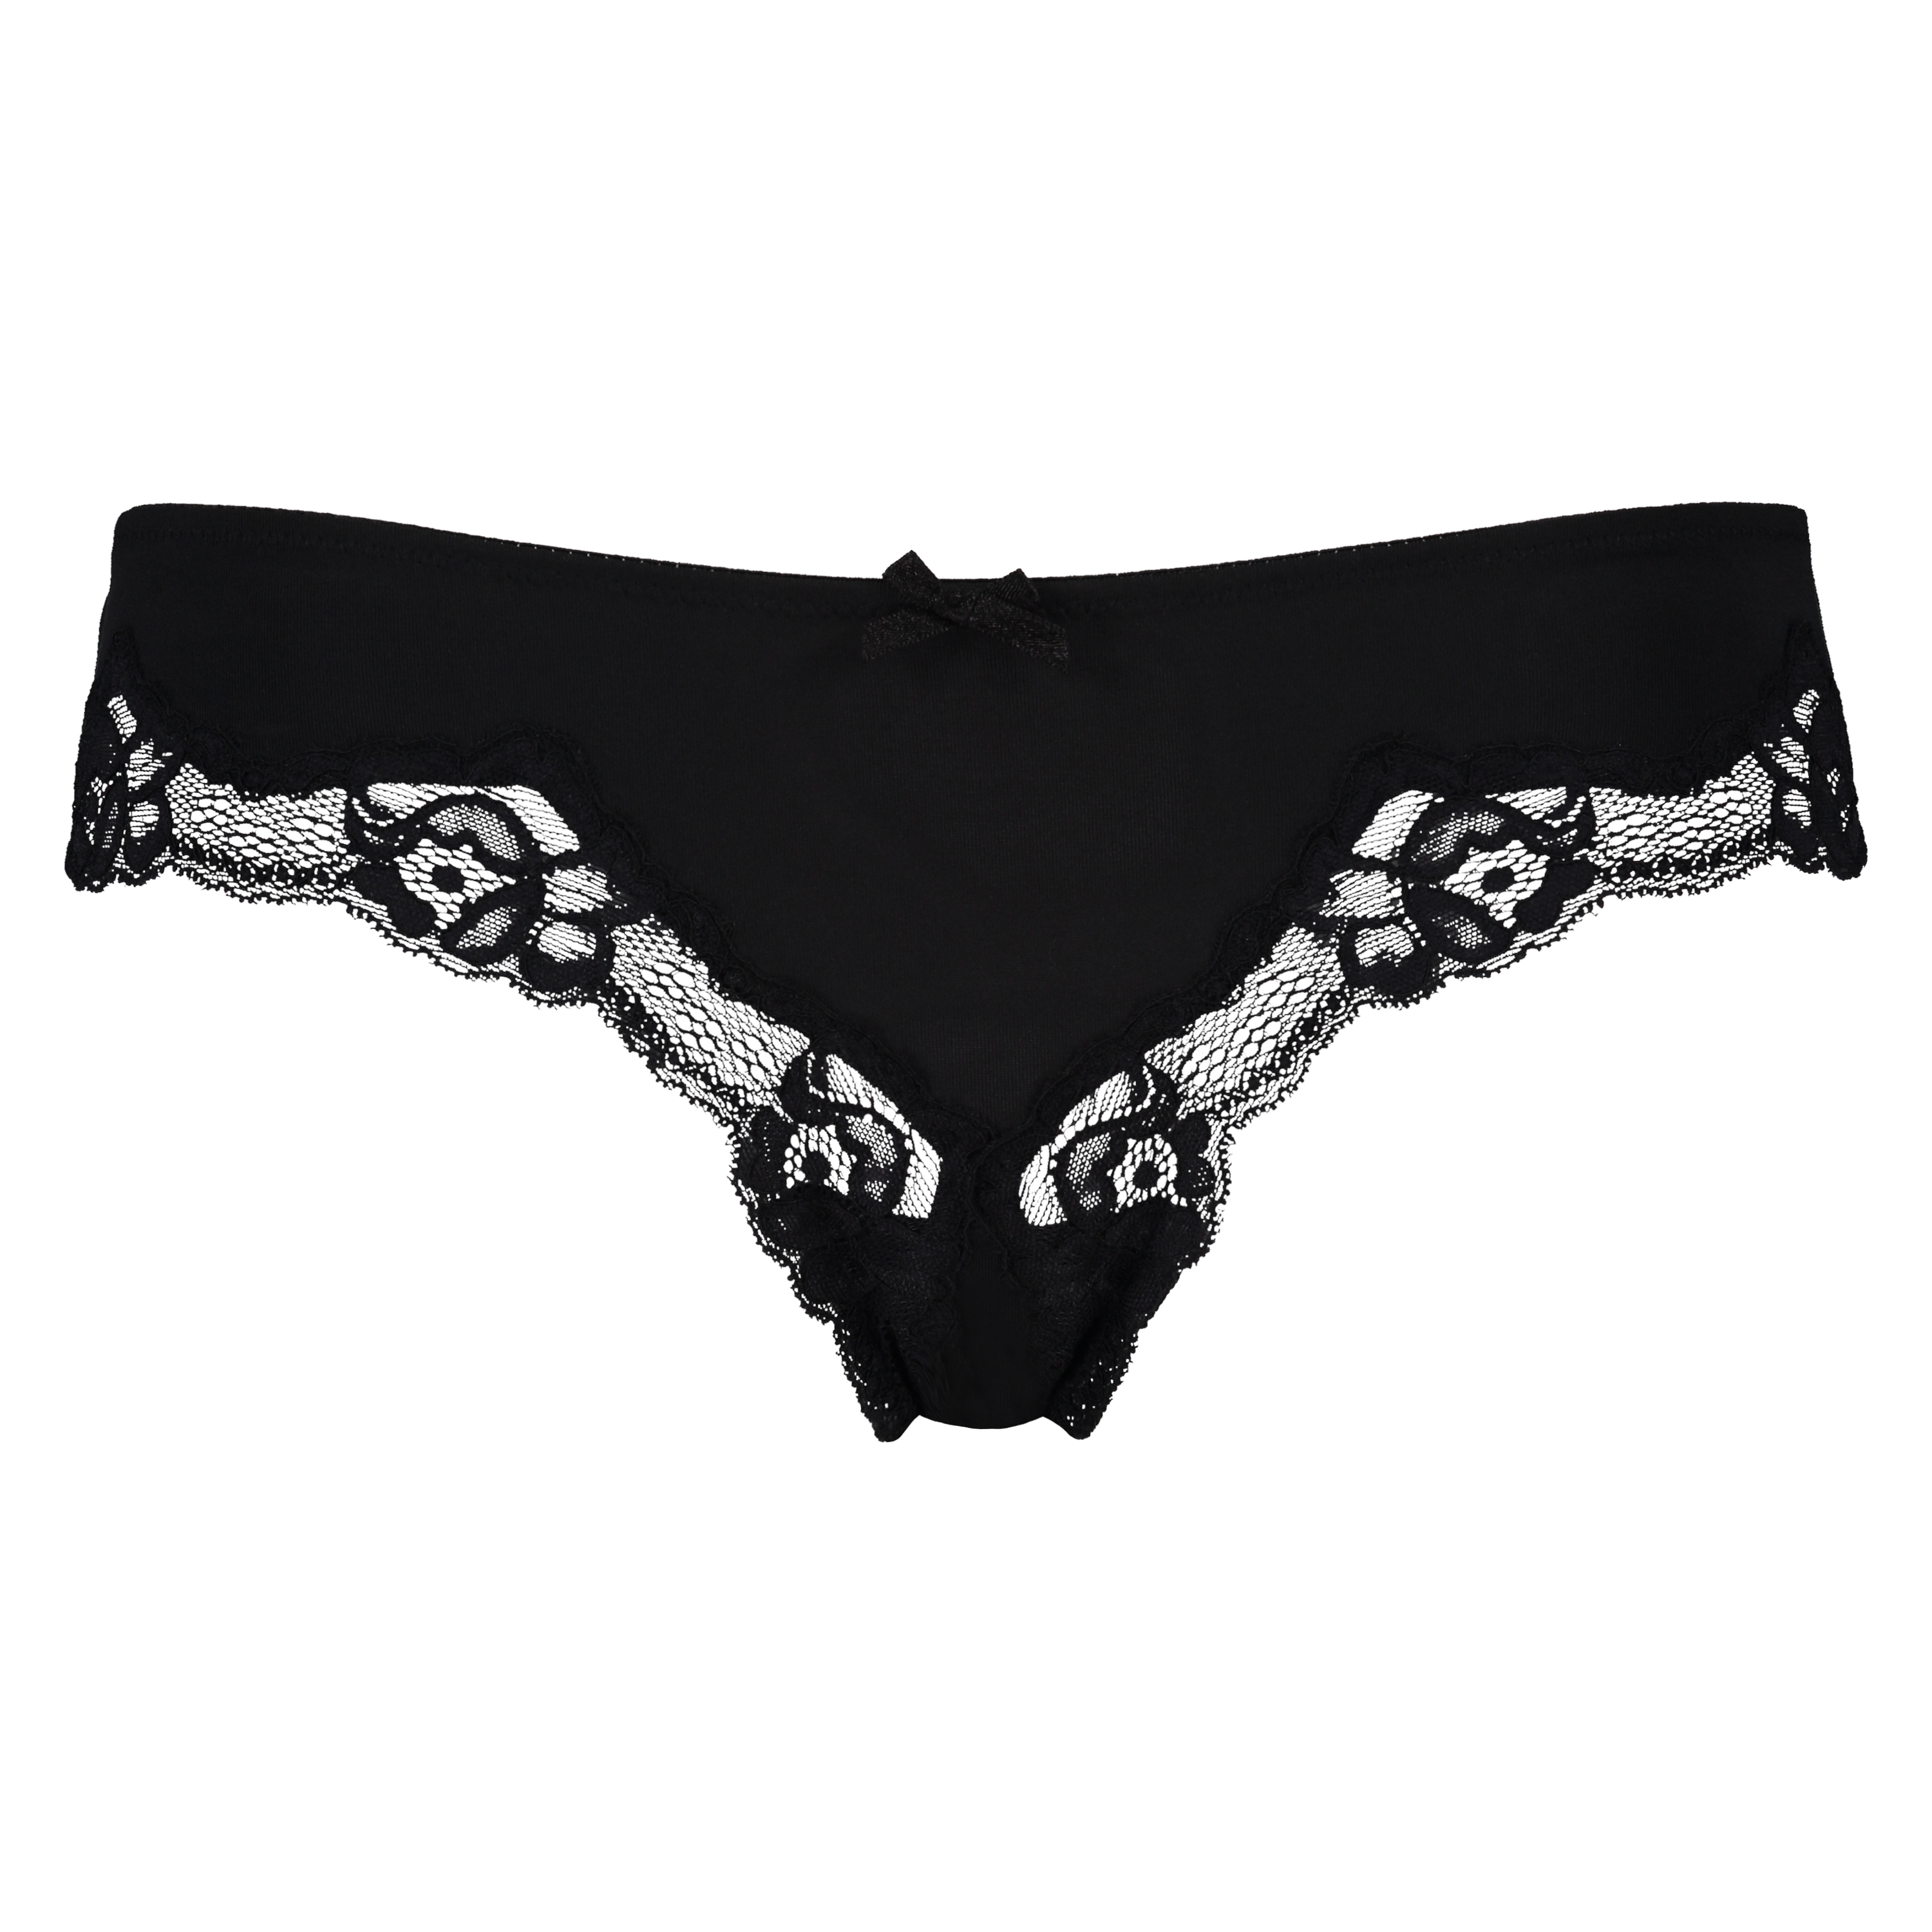 Secret Lace Brief for £8 - All Knickers - Hunkemöller